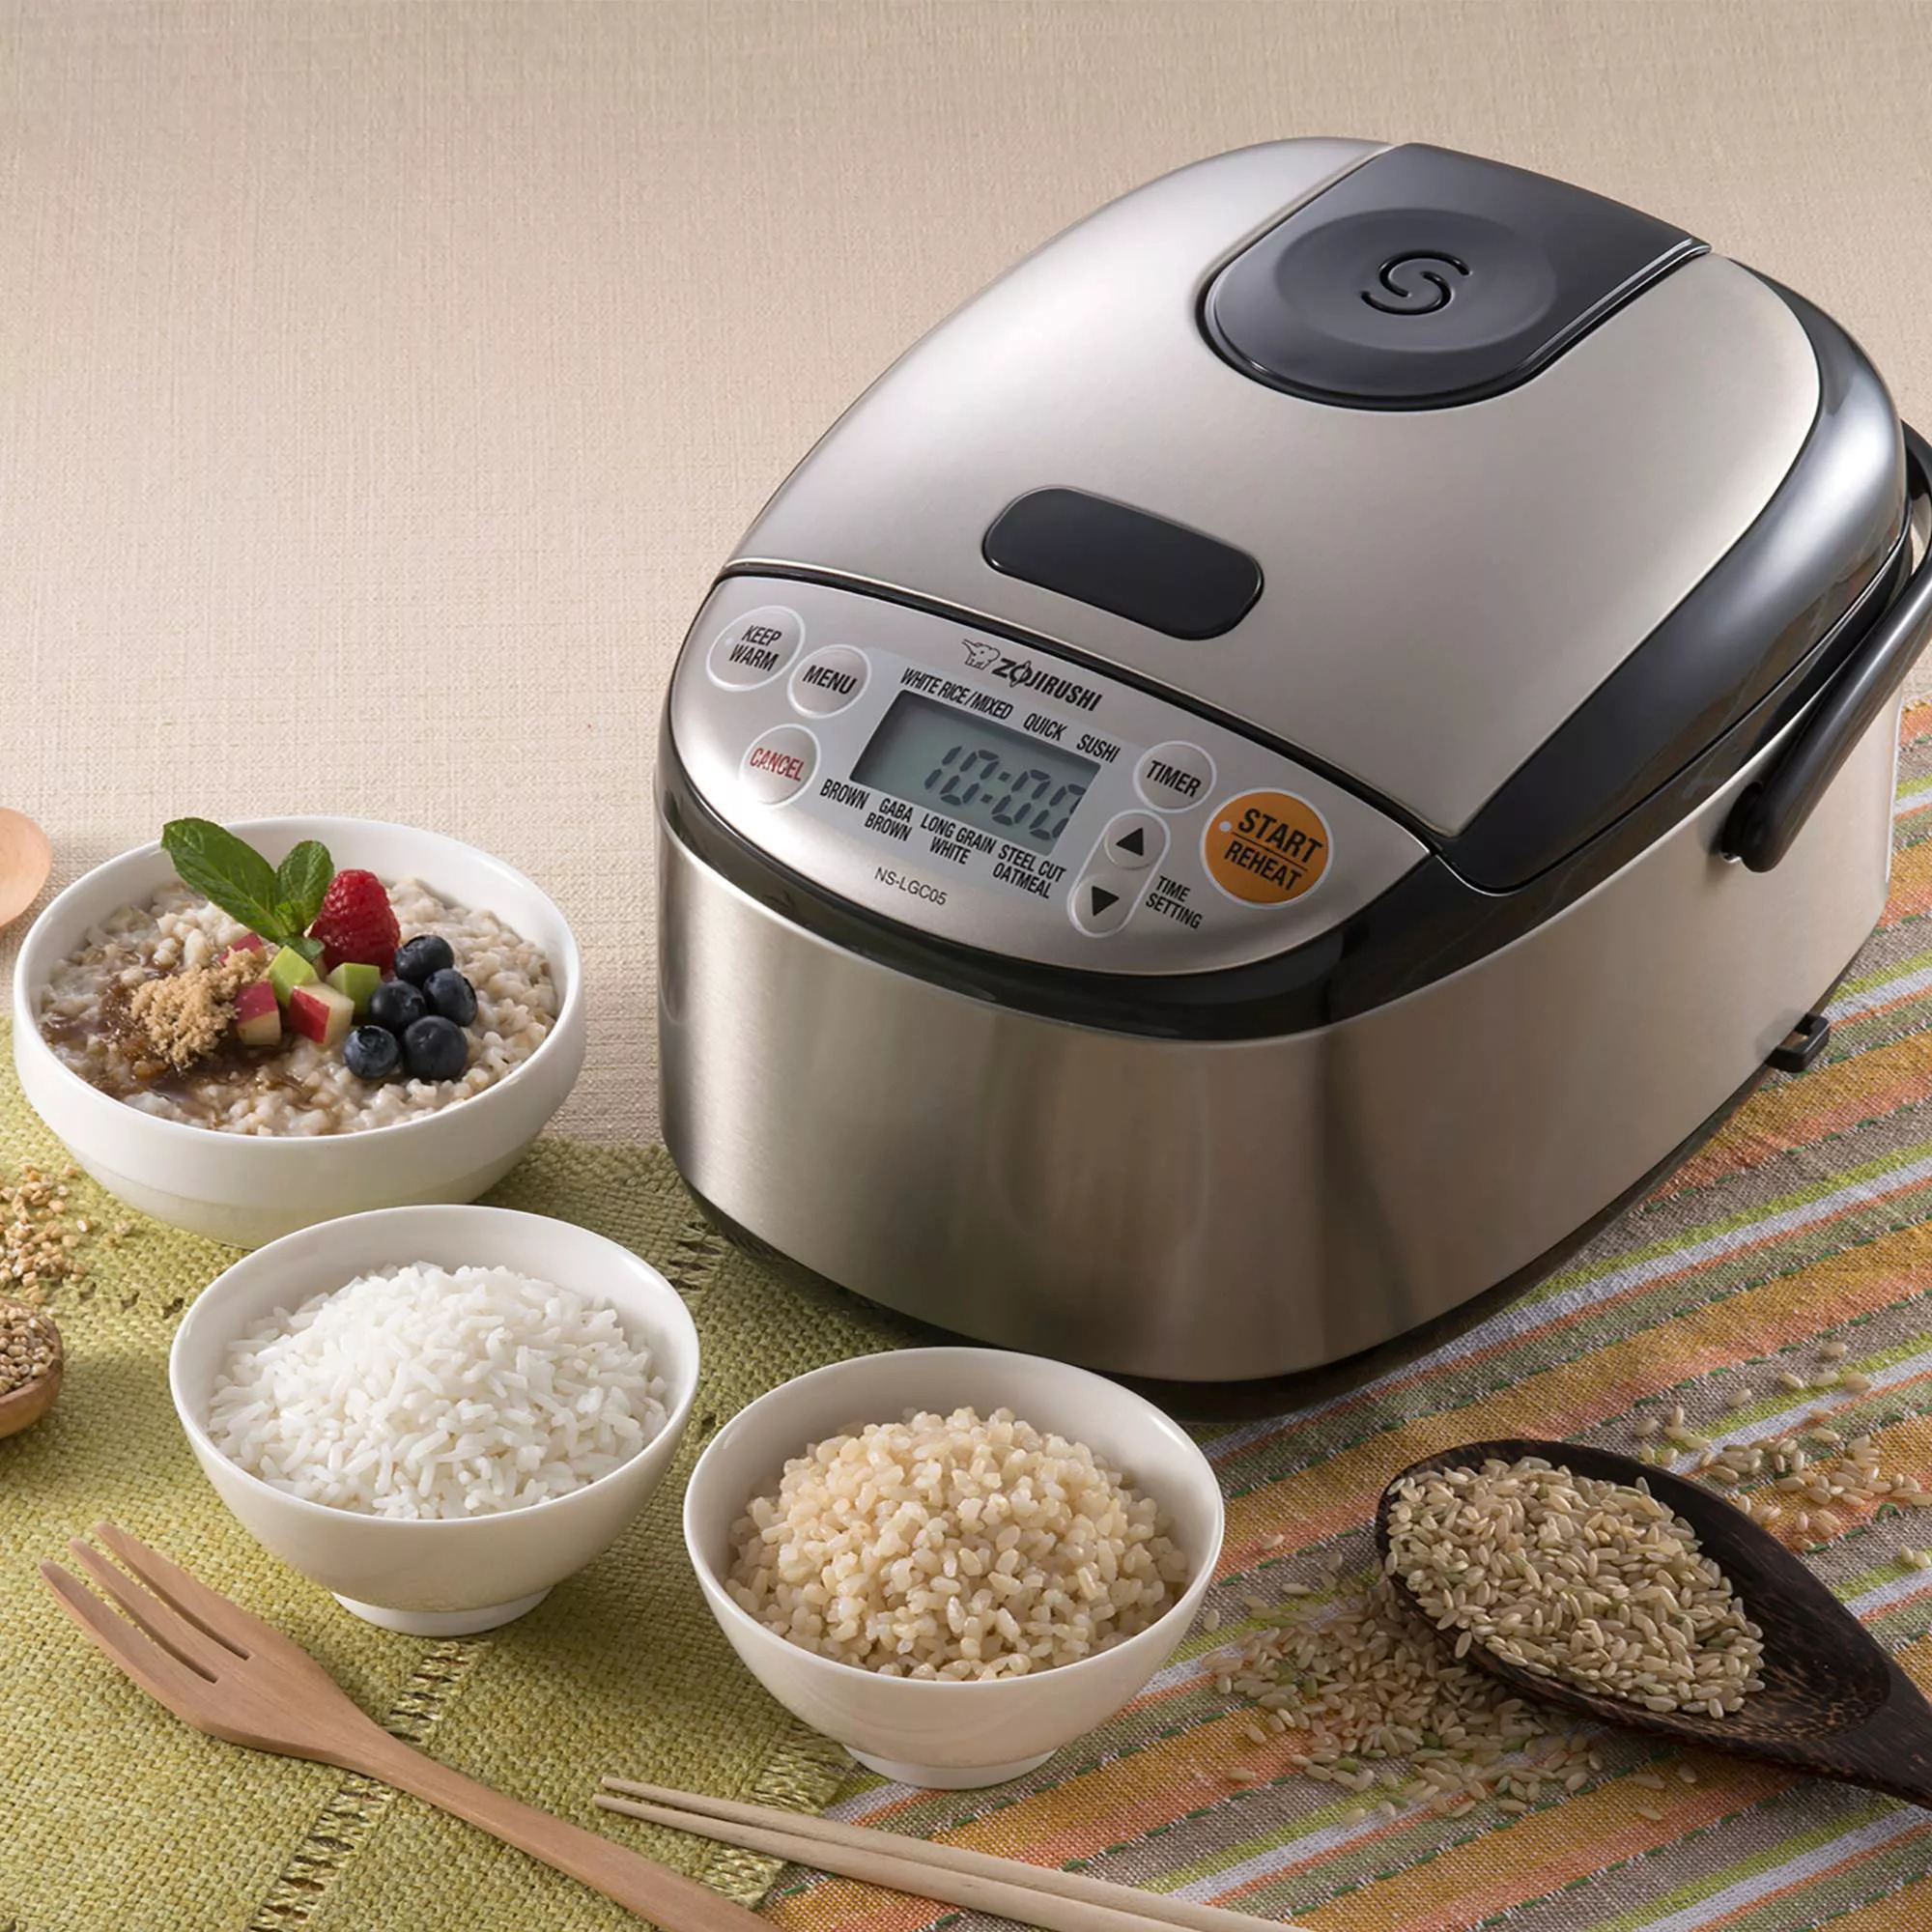 The rice cooker with a digital panel